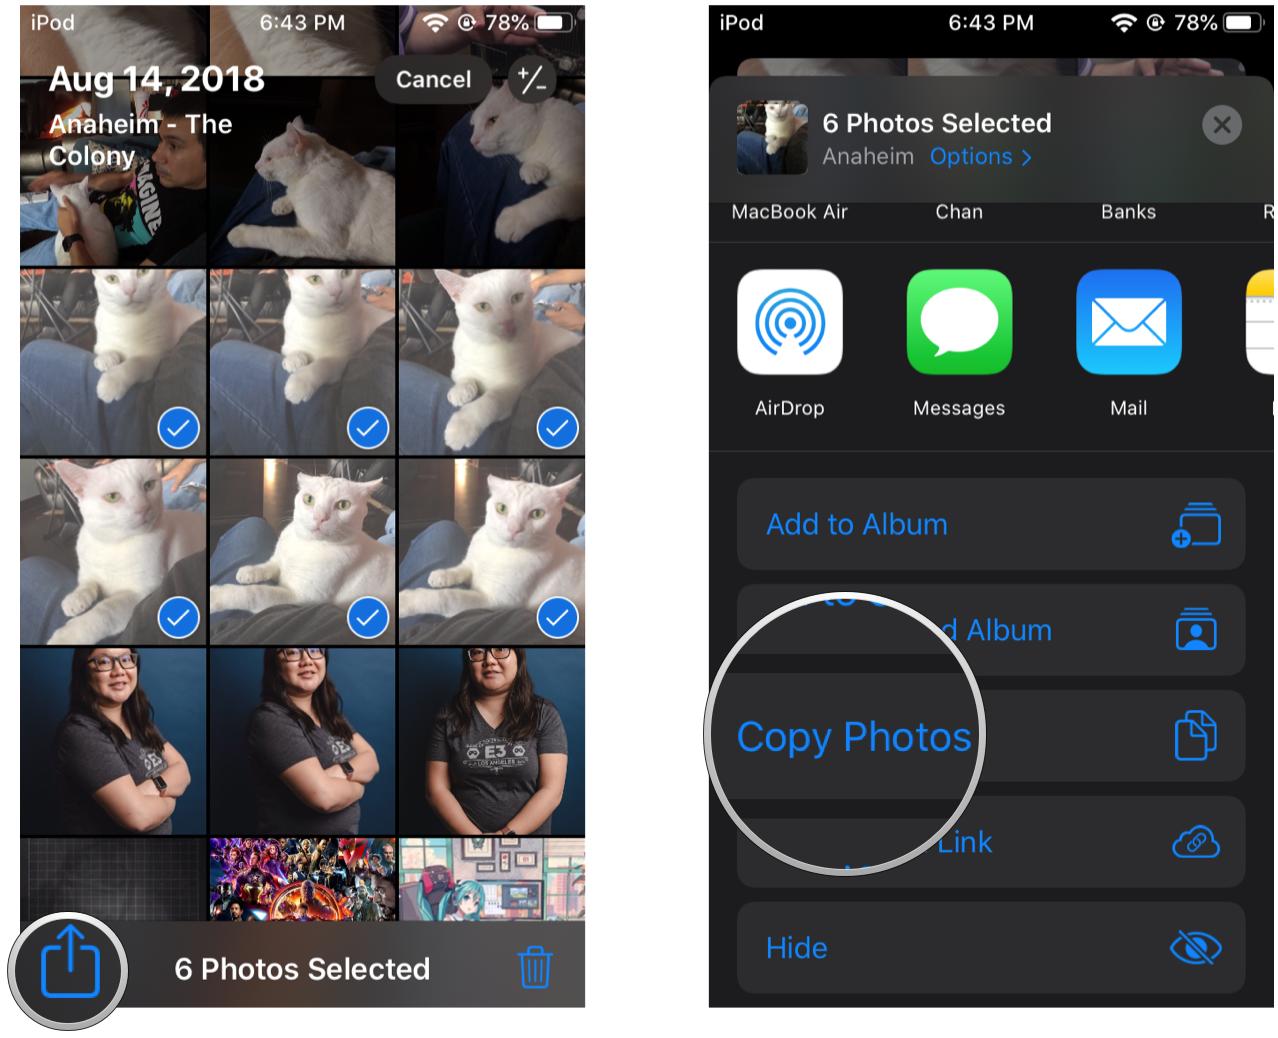 Select your photos or videos, tap Share, and select Copy Photos